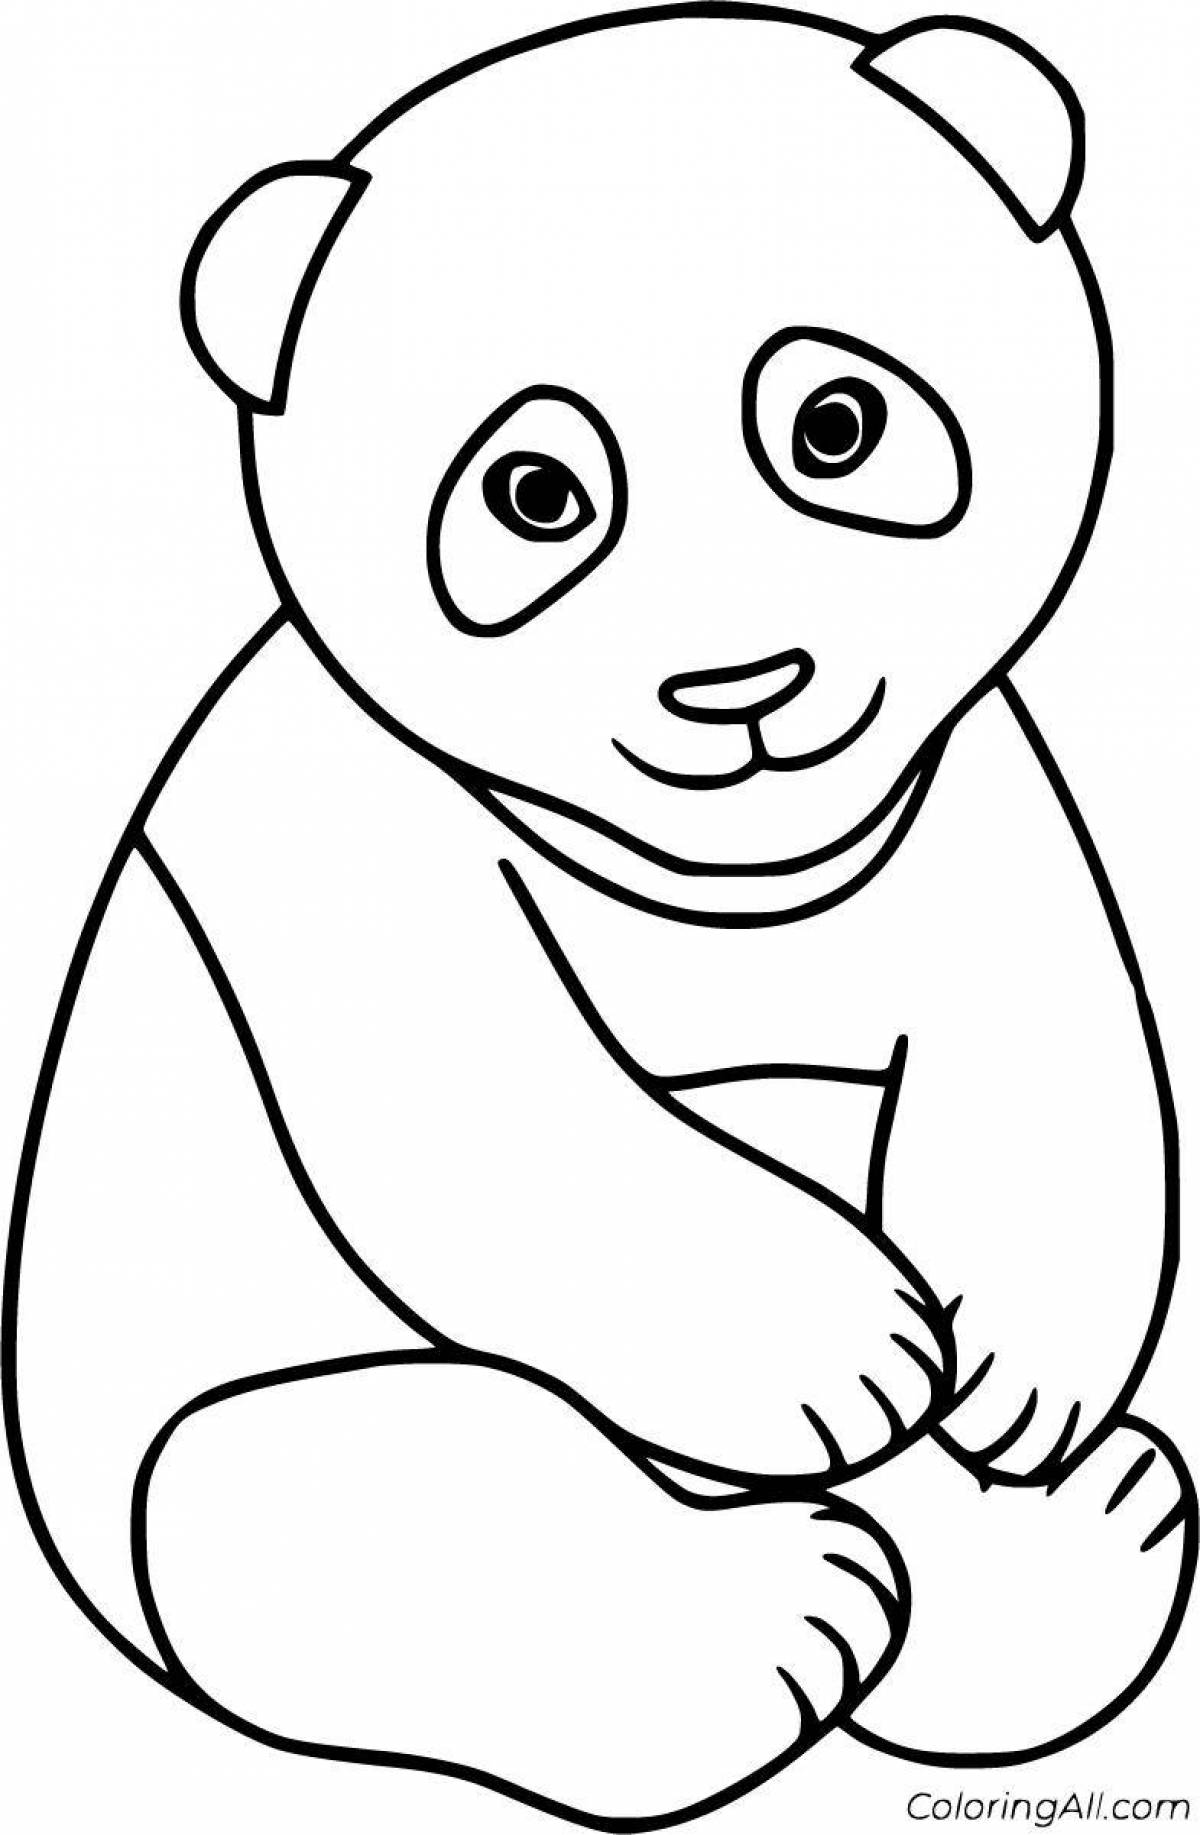 Playful panda coloring pages for girls